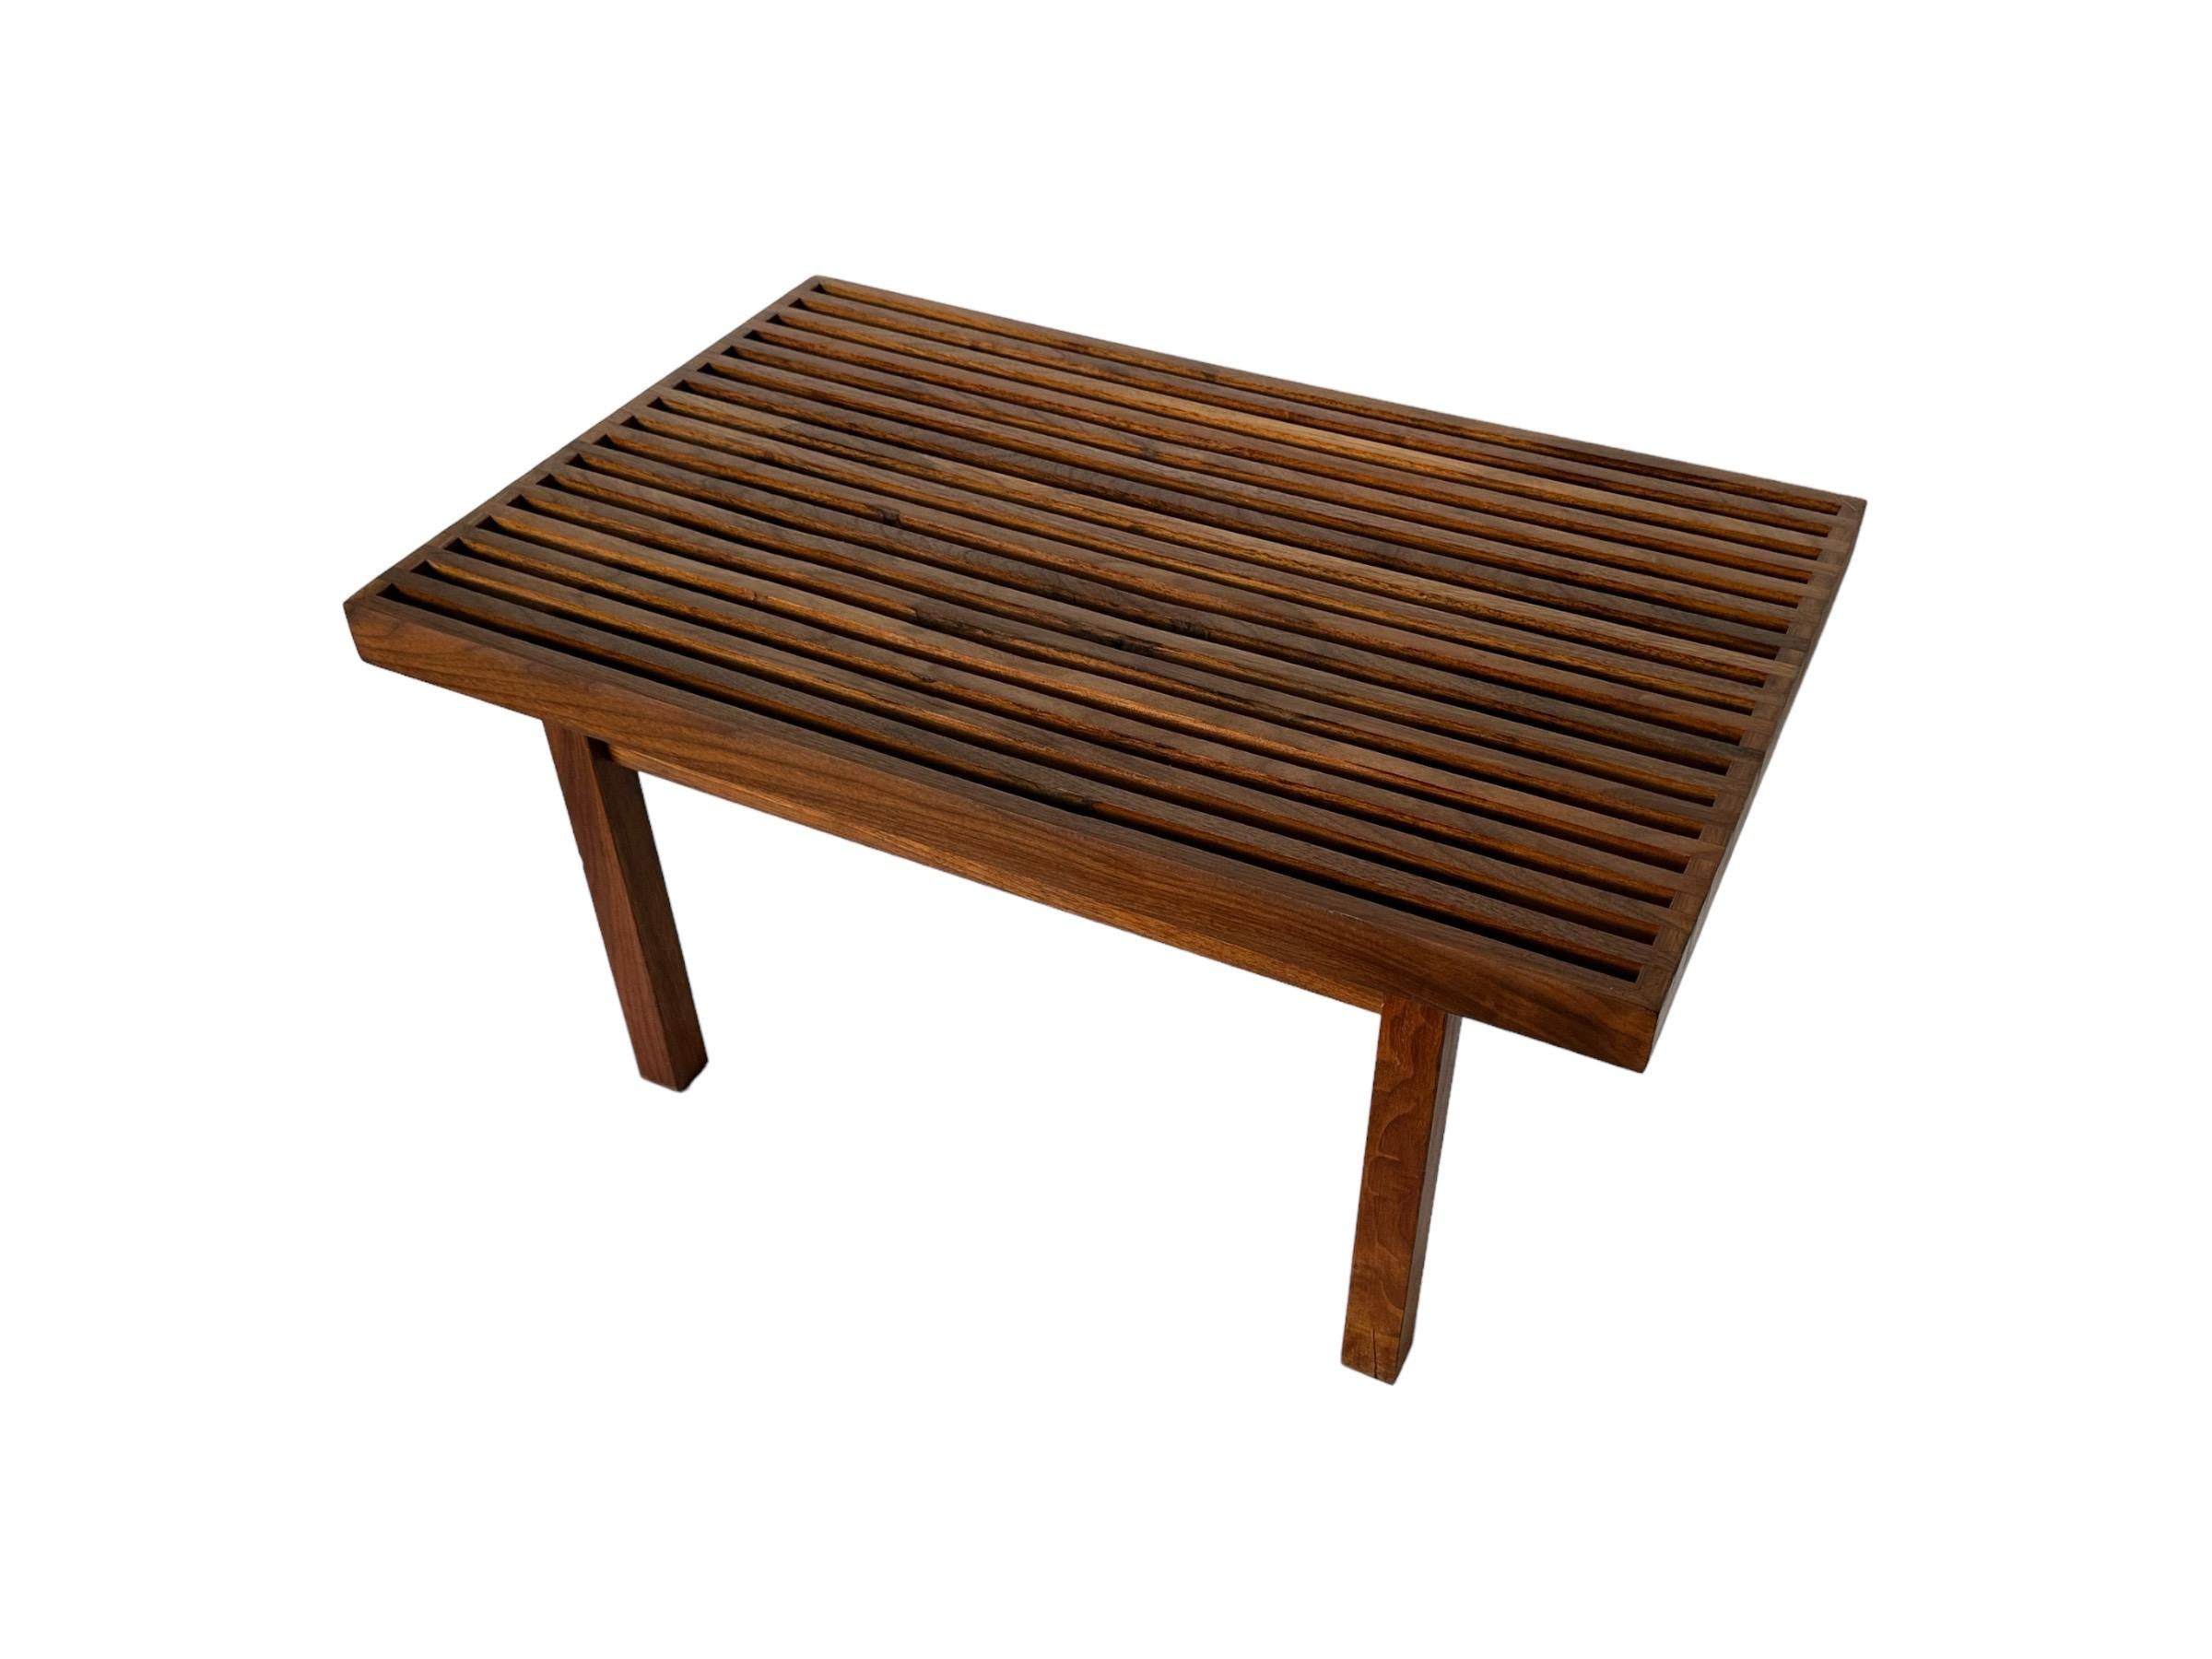 Beautiful Mel Smilow walnut slat bench. Elegant silhouette with simple lines and just the right proportions. Also could be used as a coffee table. Top and sides have been sanded and oiled. Warm attractive nuance in color and grain.